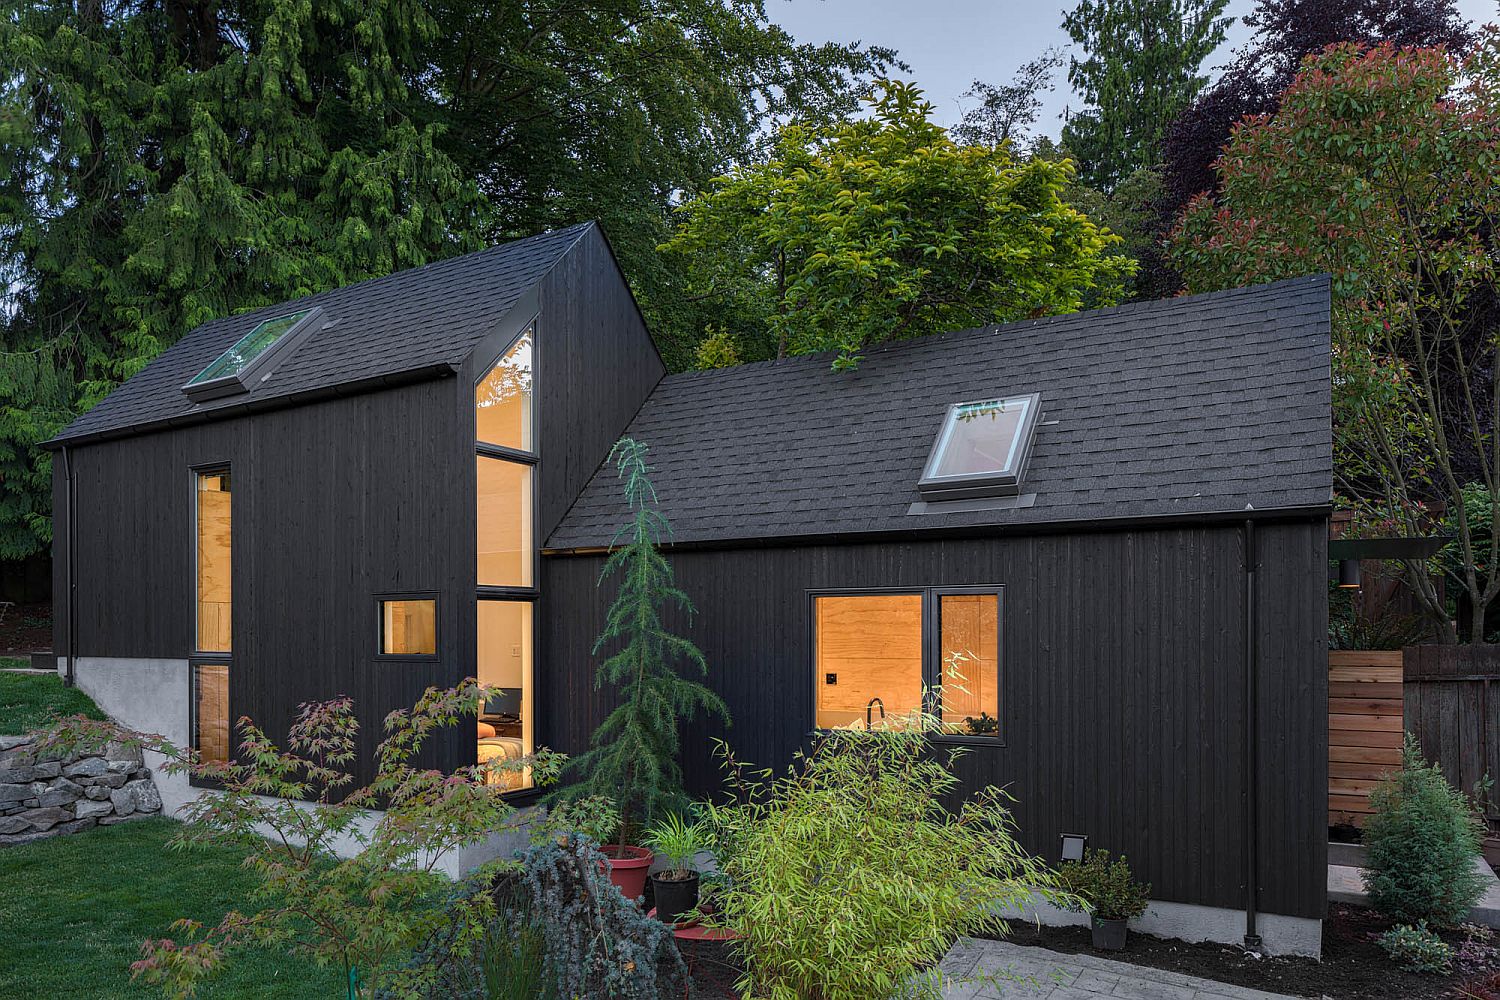 Old garage turned into an independant tiny home in Seattle